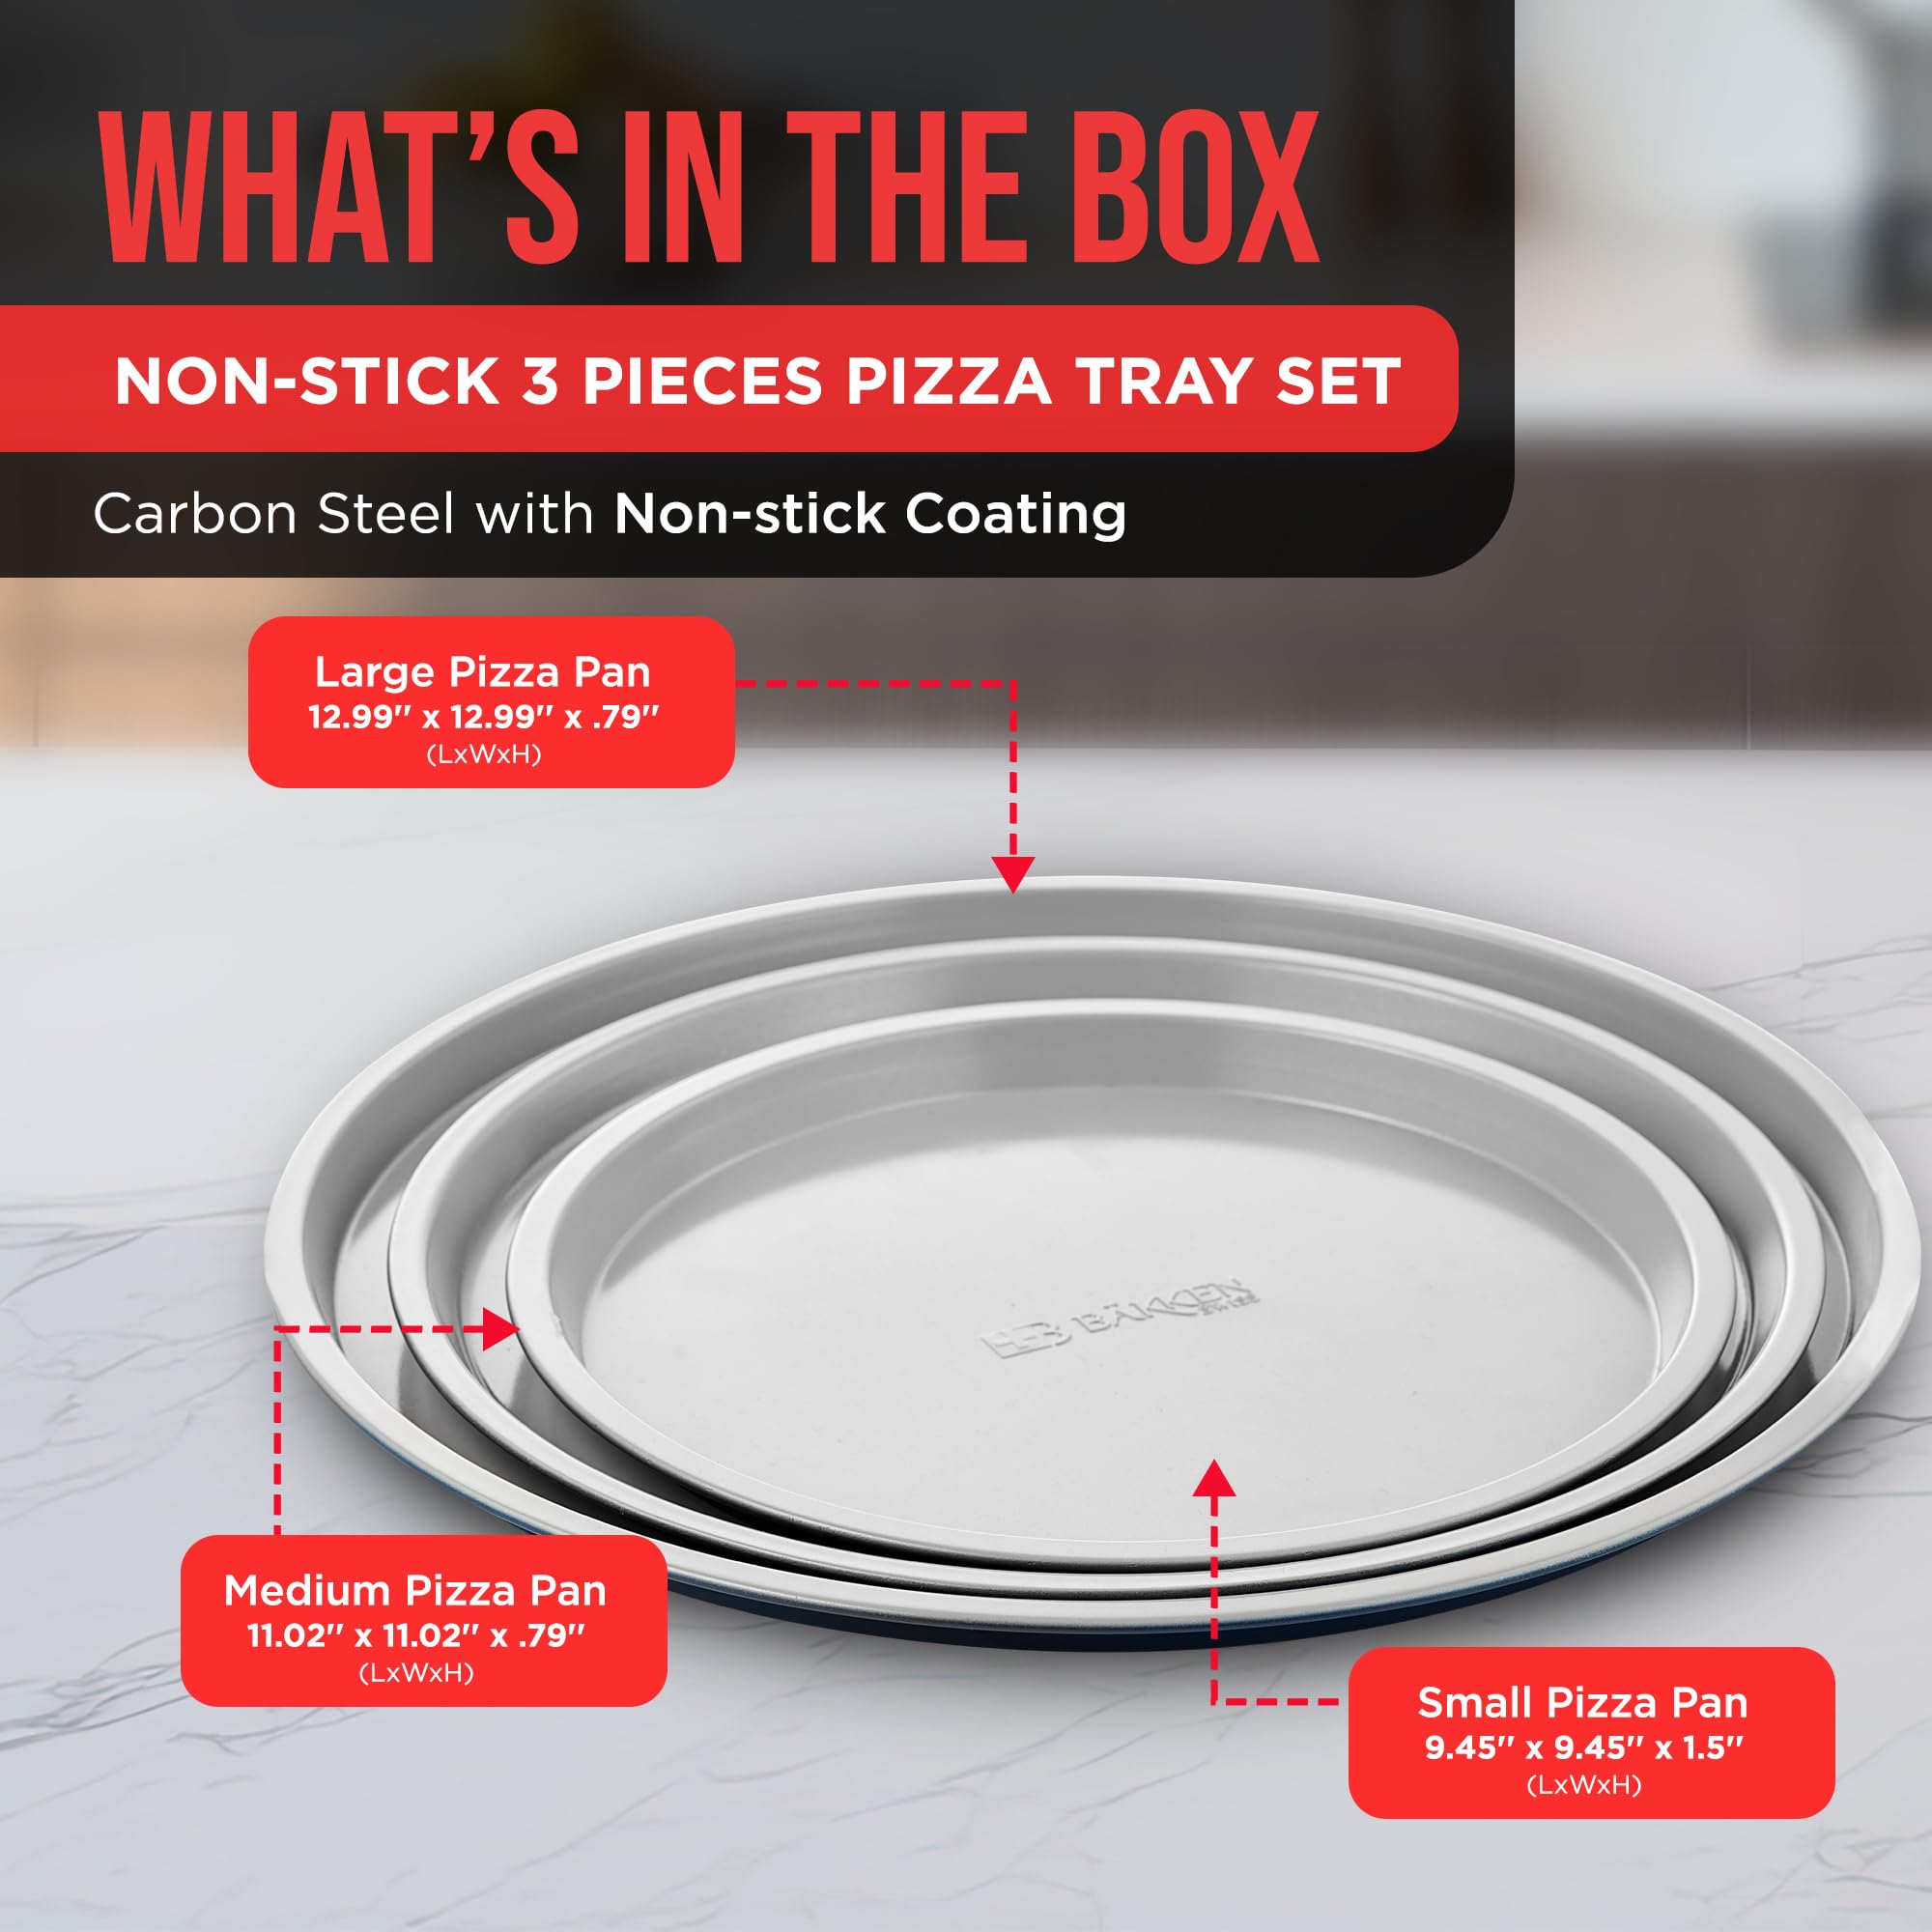 Bakken- Swiss Pizza Tray Set 3-Piece – Gray Ceramic Coating, Non-Stick, Round Steel Pizza Pans - Dishwasher Safe, Premium Bakeware for Home Cooking Heatly coating